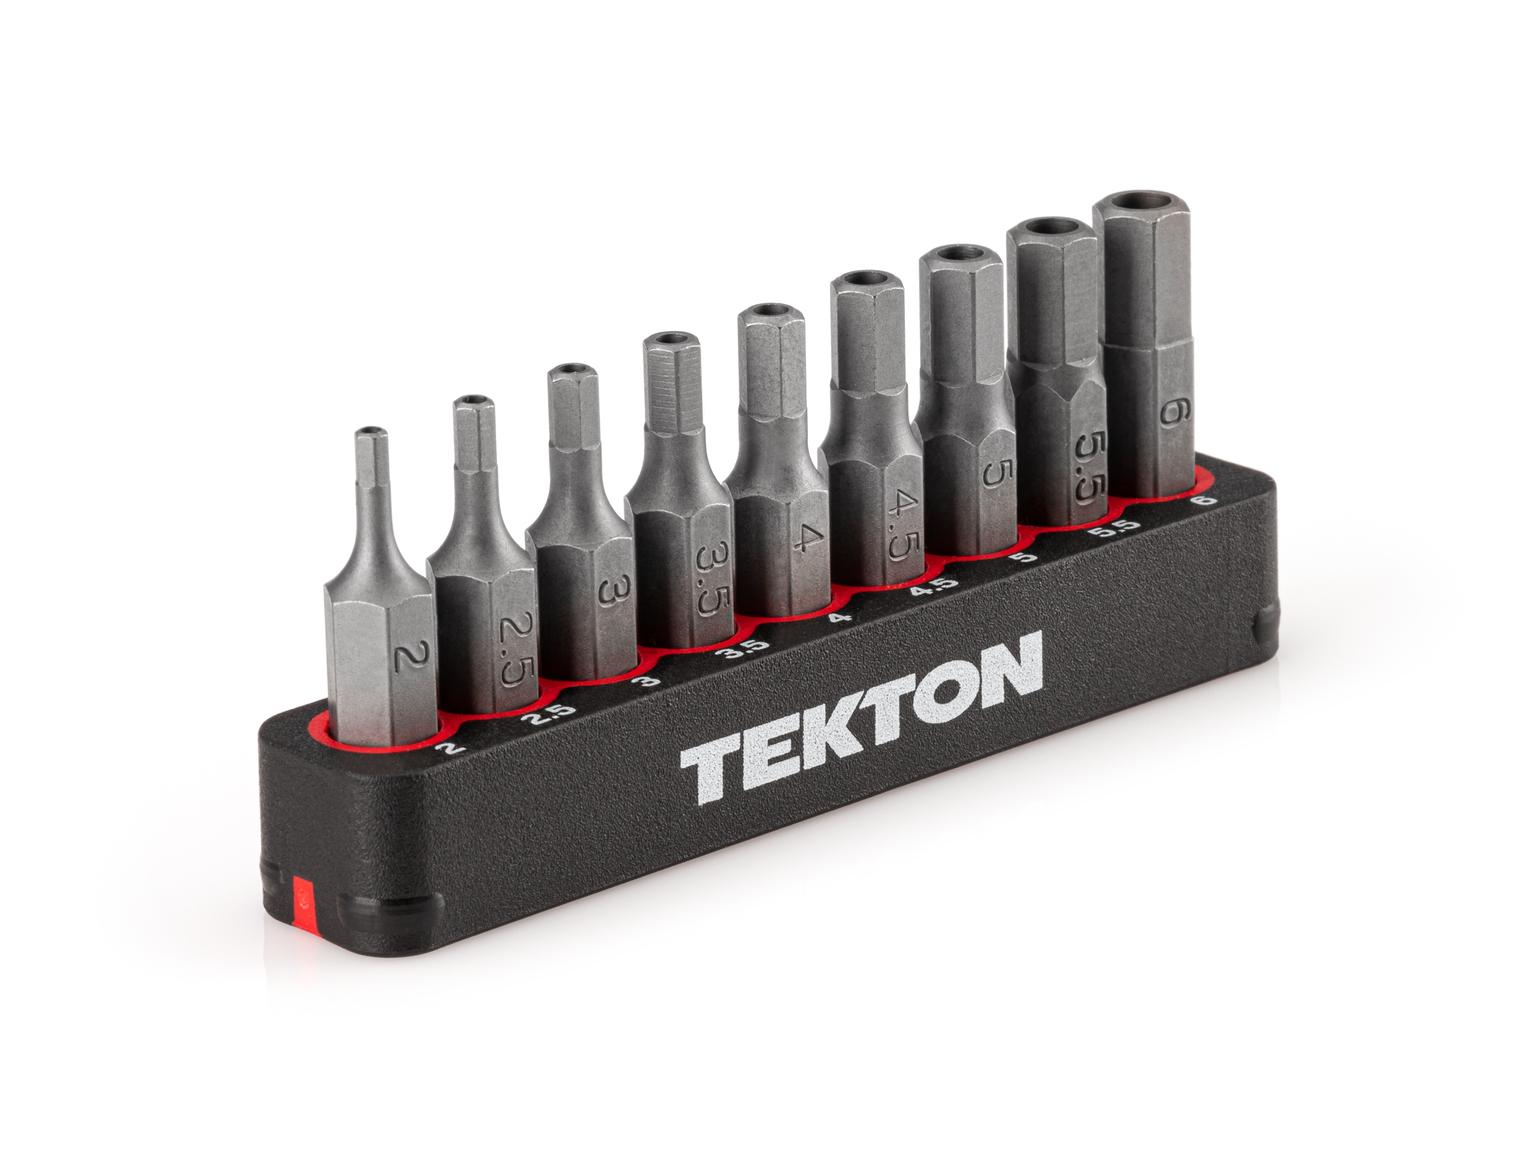 1/4 Inch Metric Security Hex Bit Set with Rail (9-Piece)